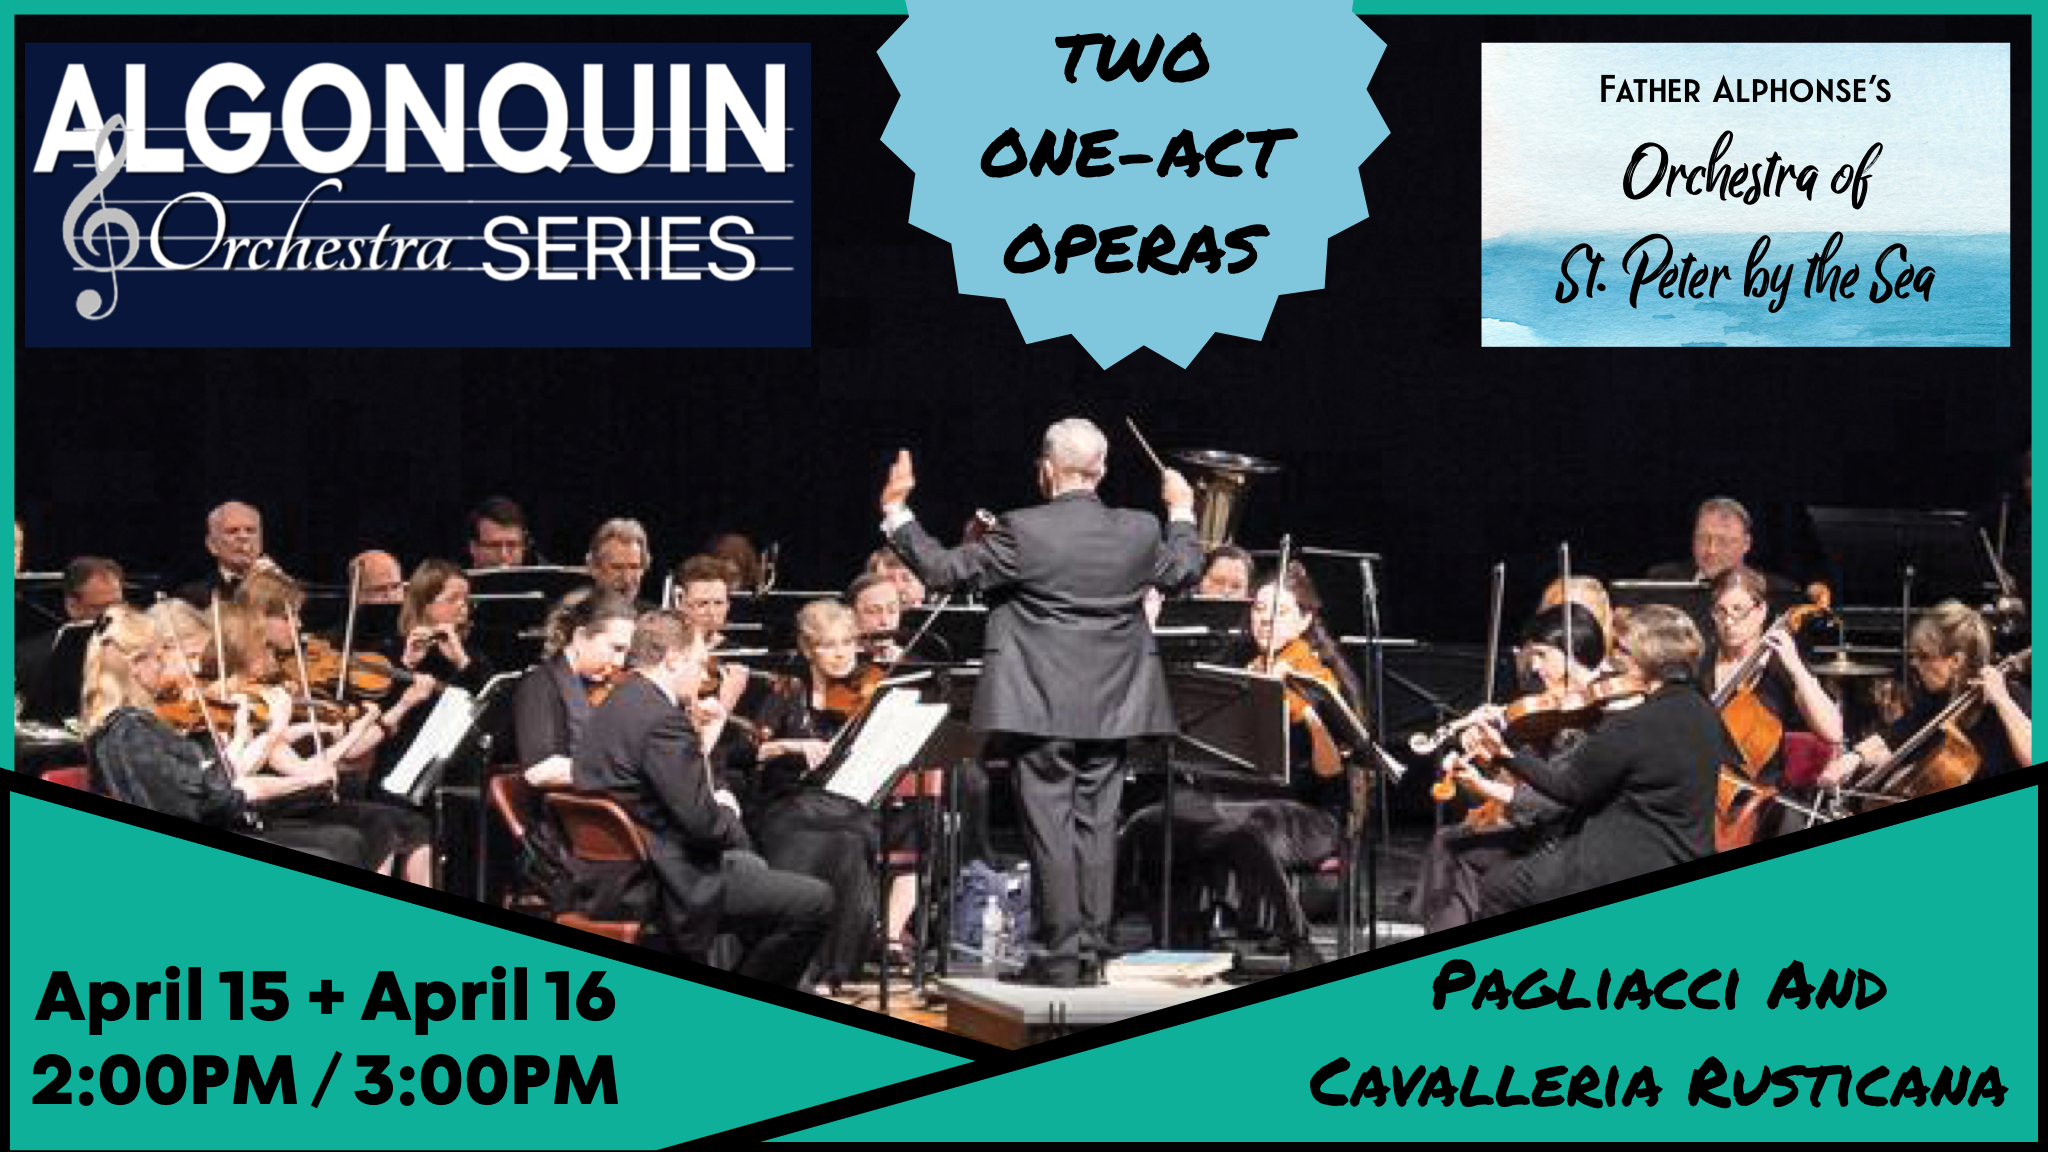 Two One-Act Operas: Pagliacci and Cavalleria Rusticana